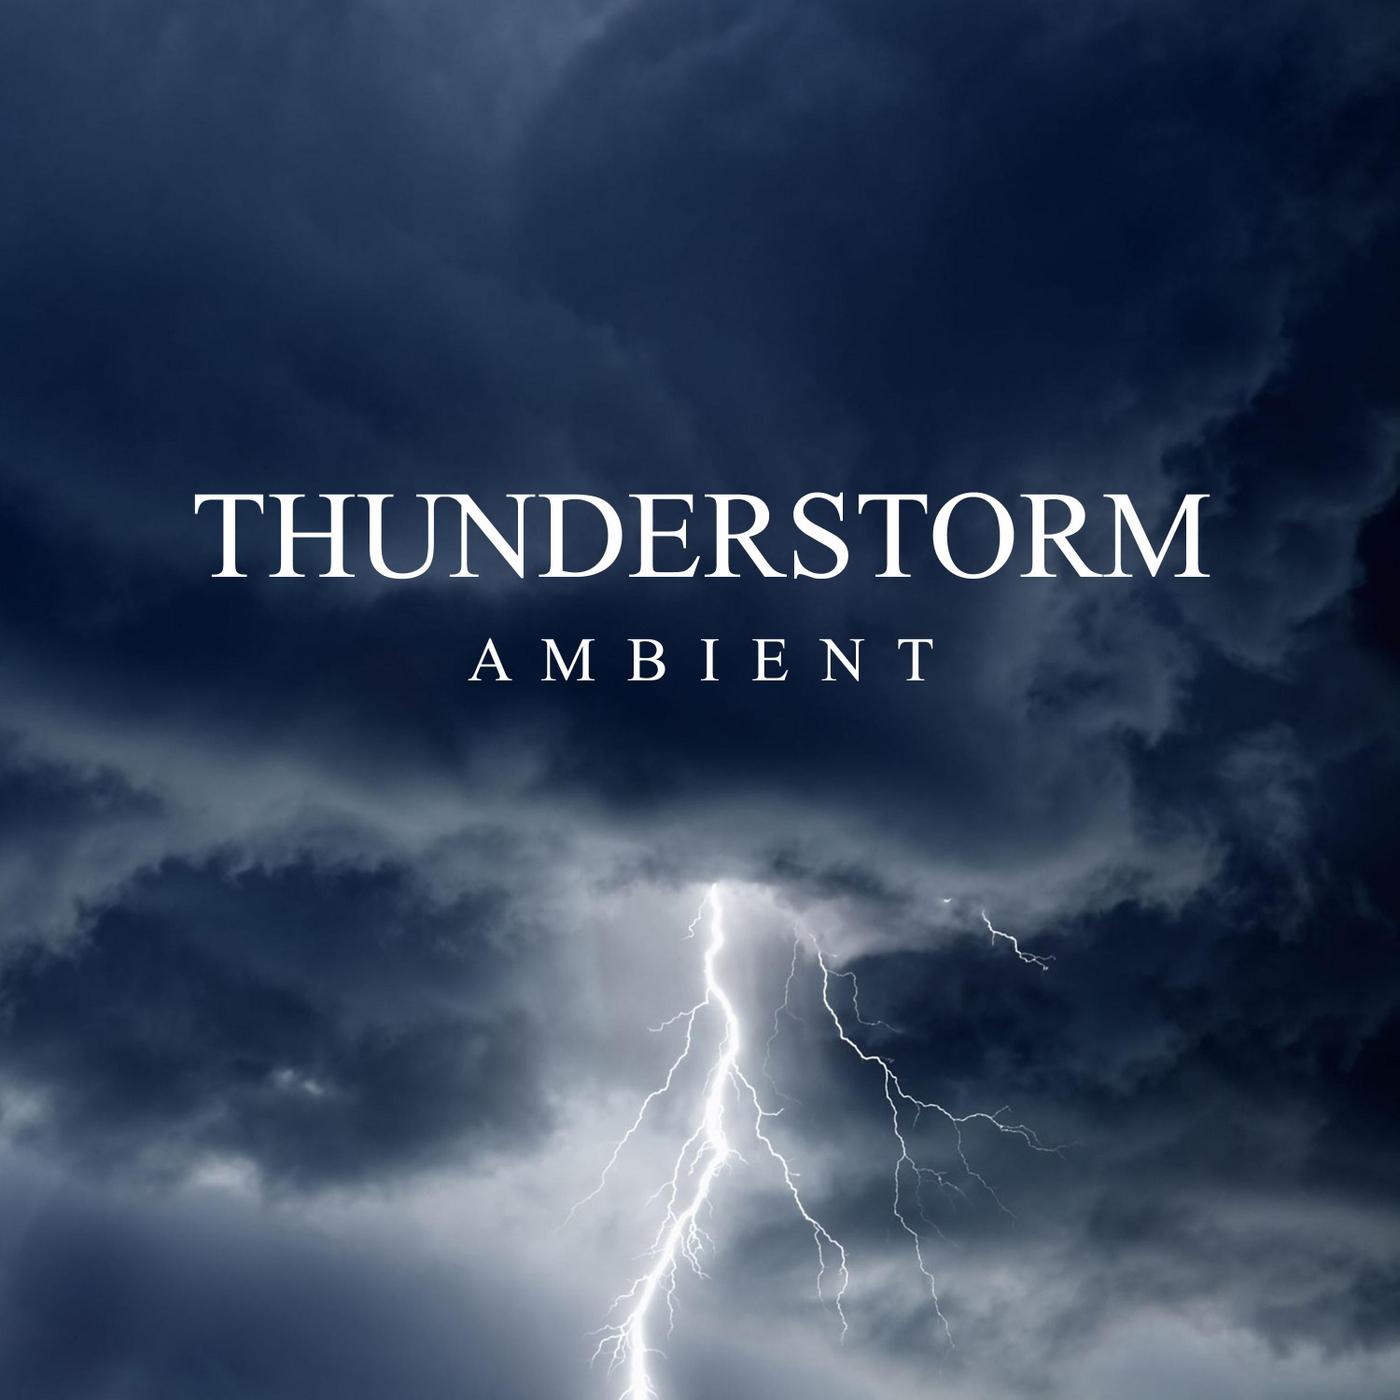 Thunderstorm Ambient